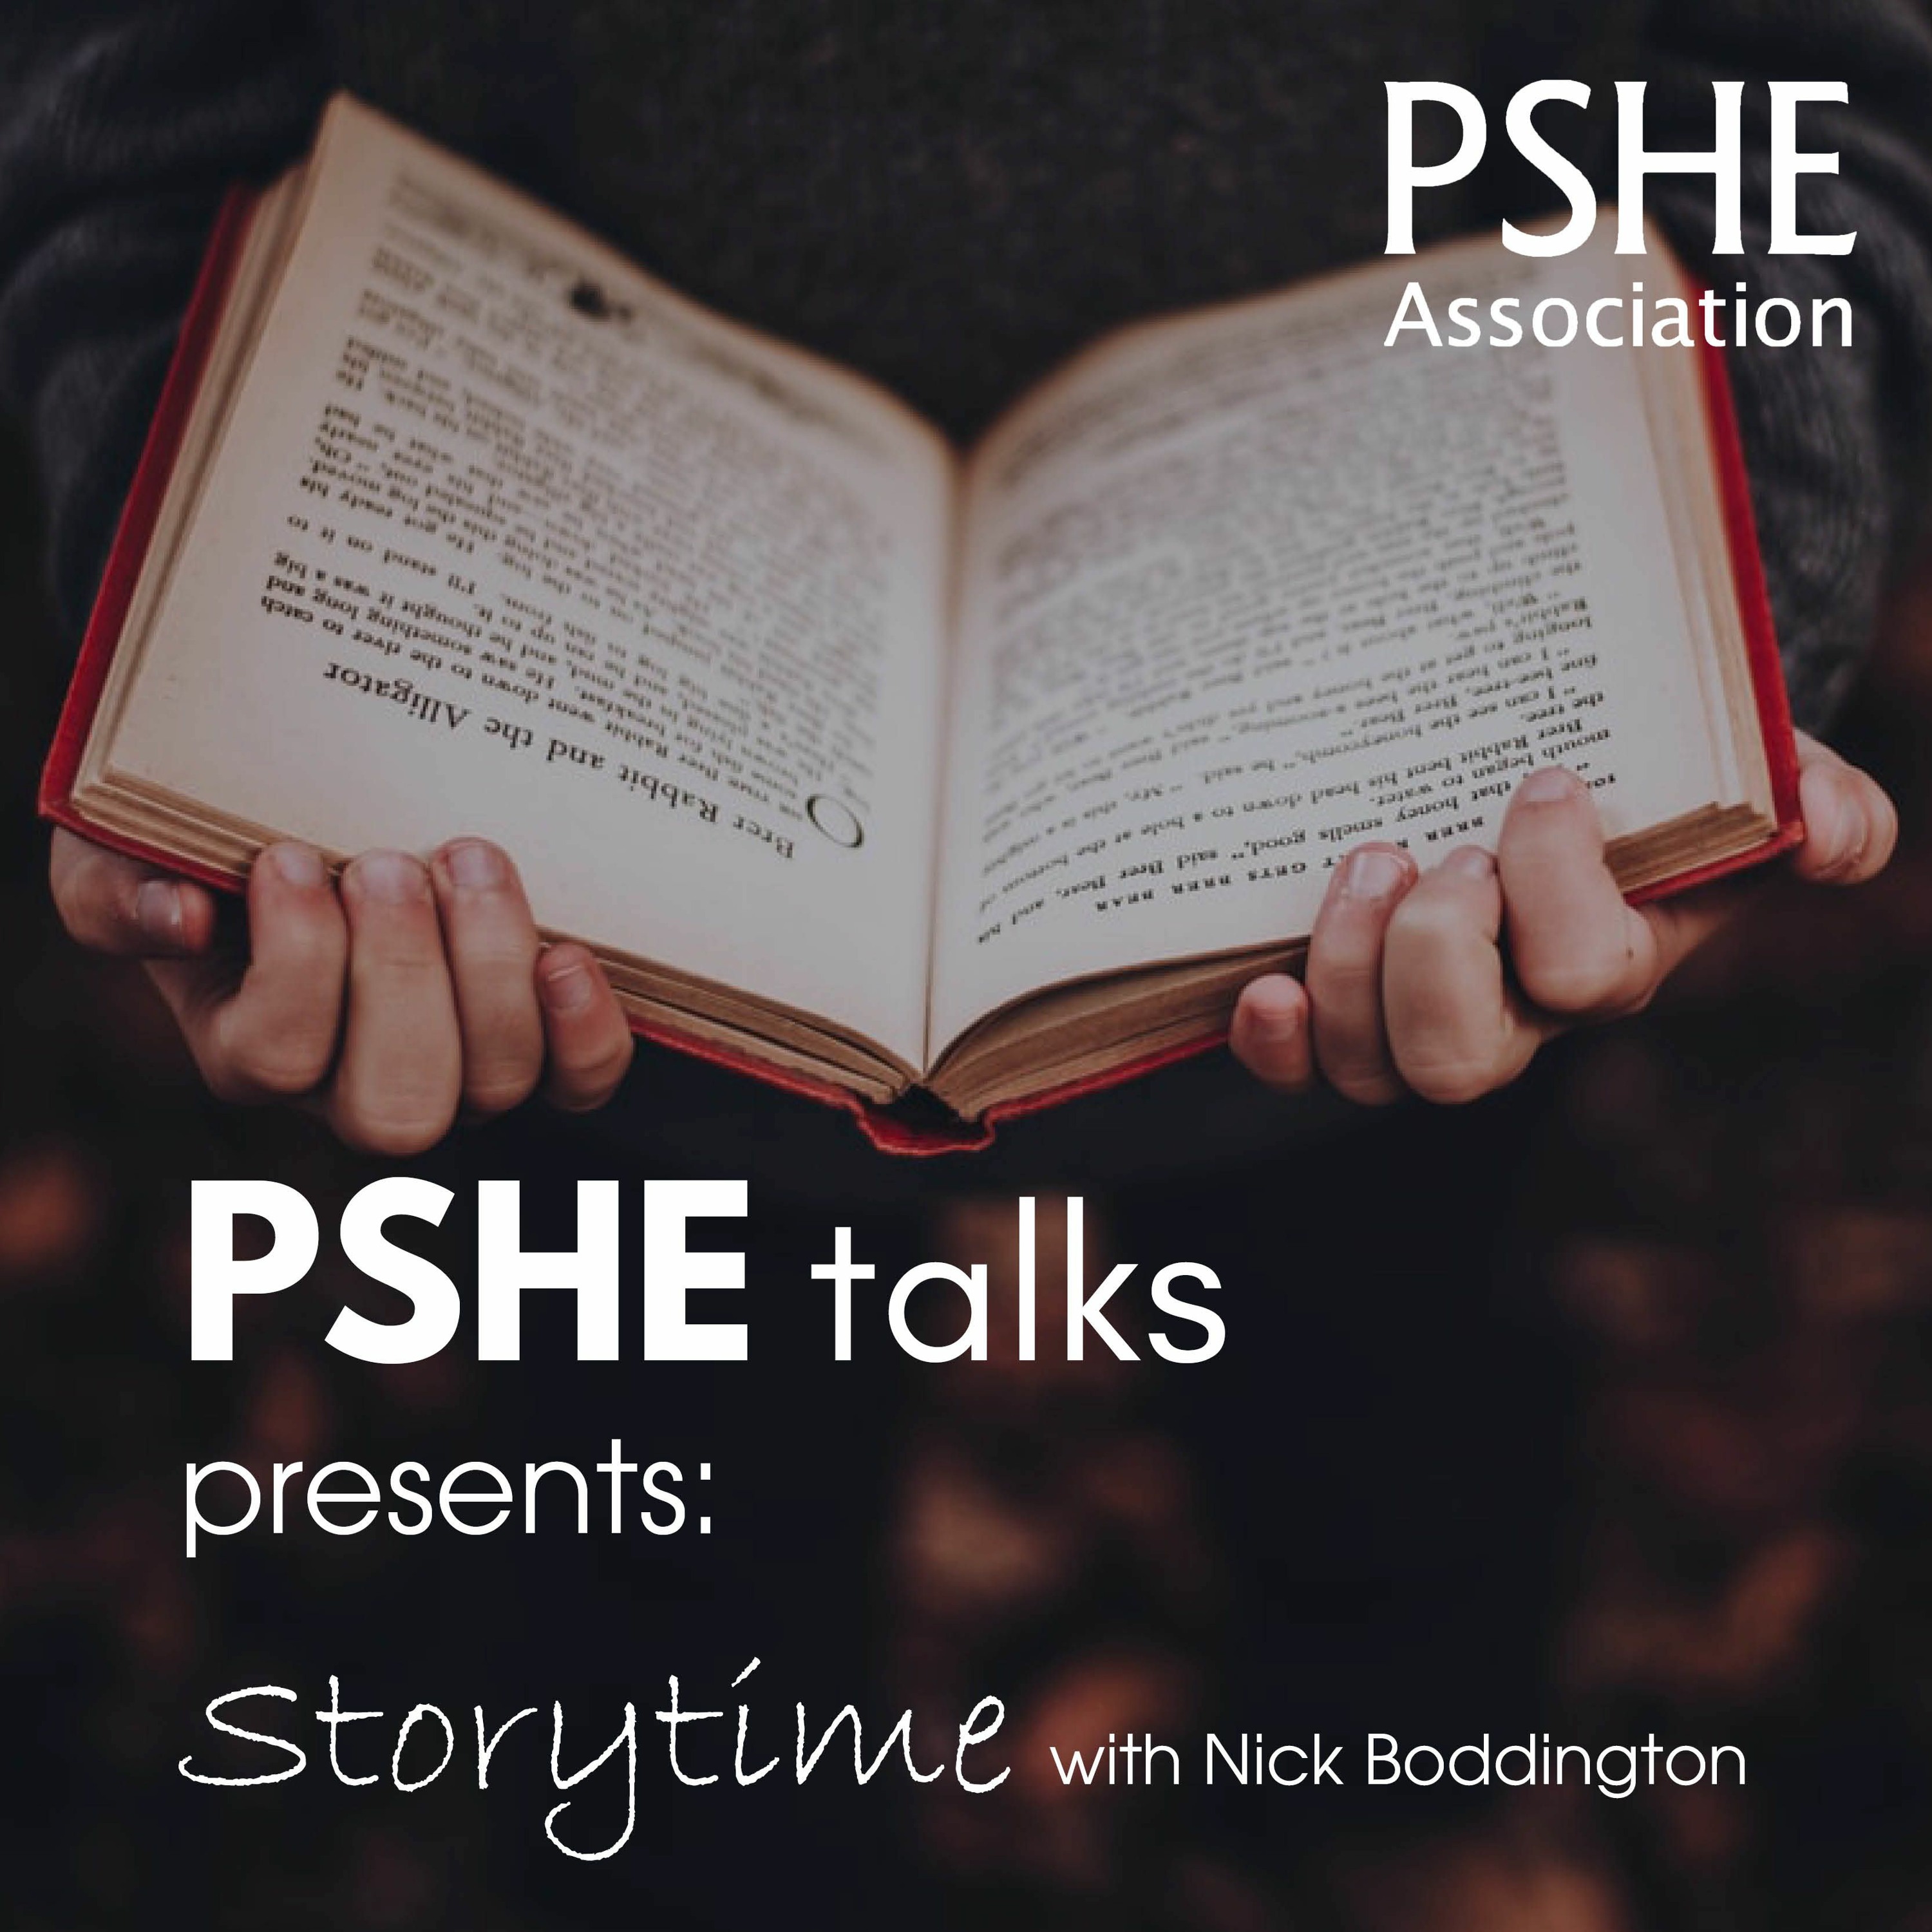 Choosing literature as a route into learning in PSHE education